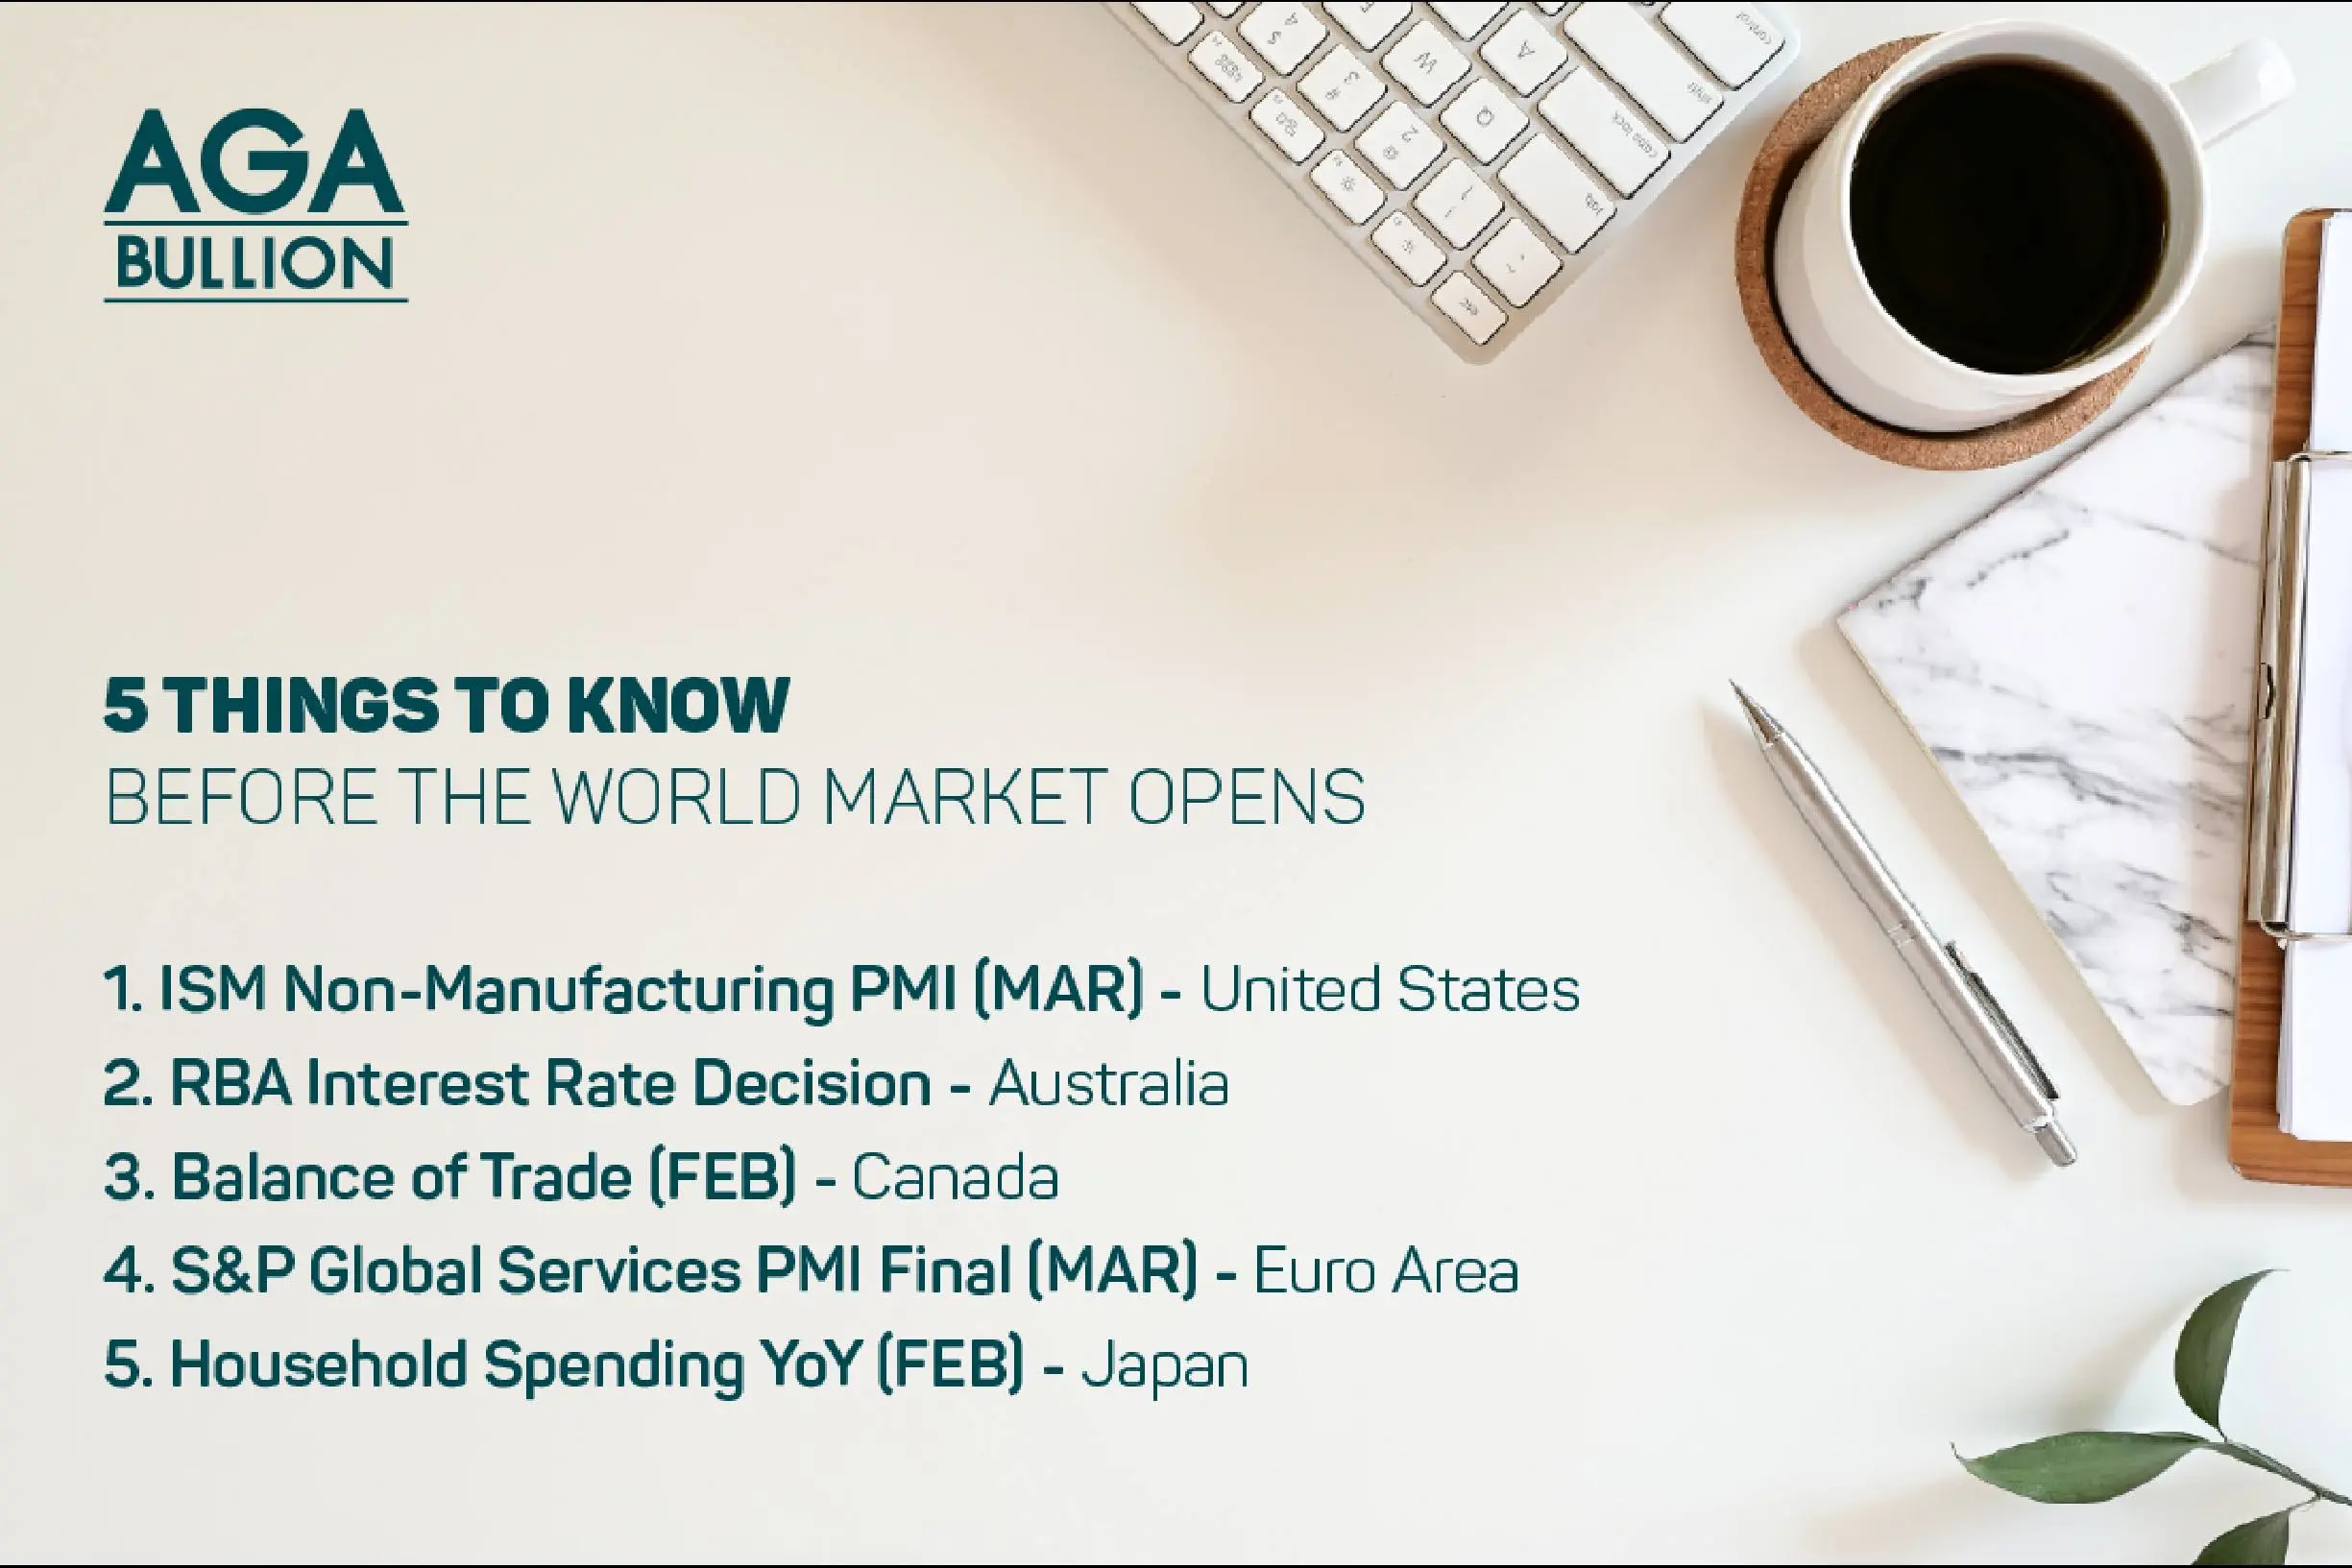 5 things to know before the World Market opens 5th April 2022